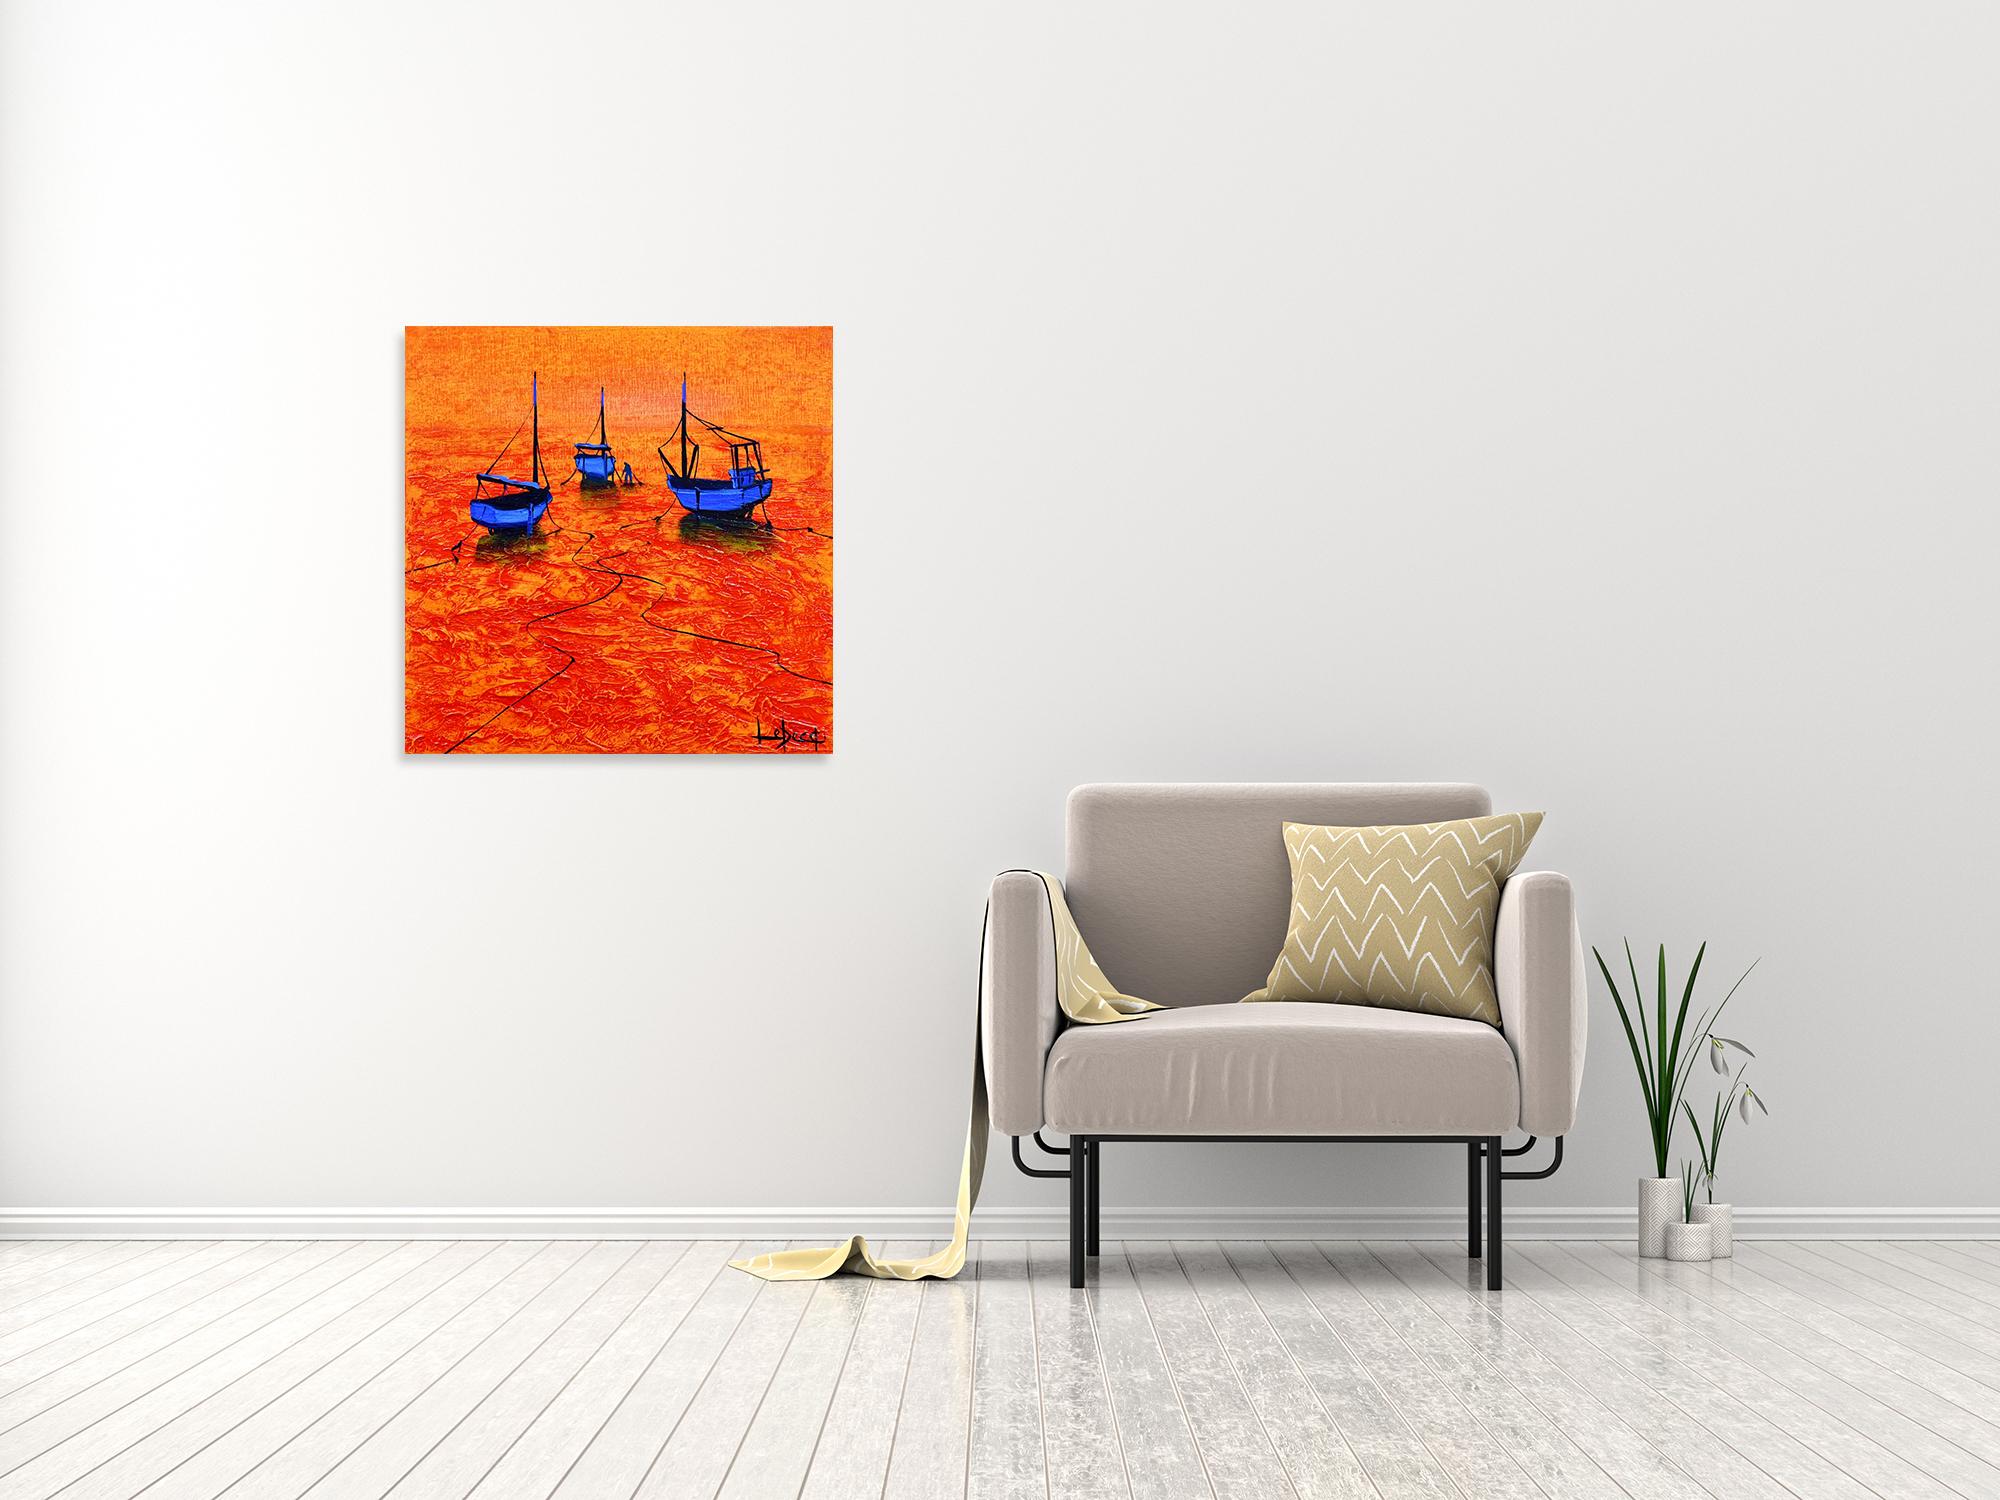 Ombre Du Soleil - Boats In The Ocean Painting by Denis Lebecqs 1